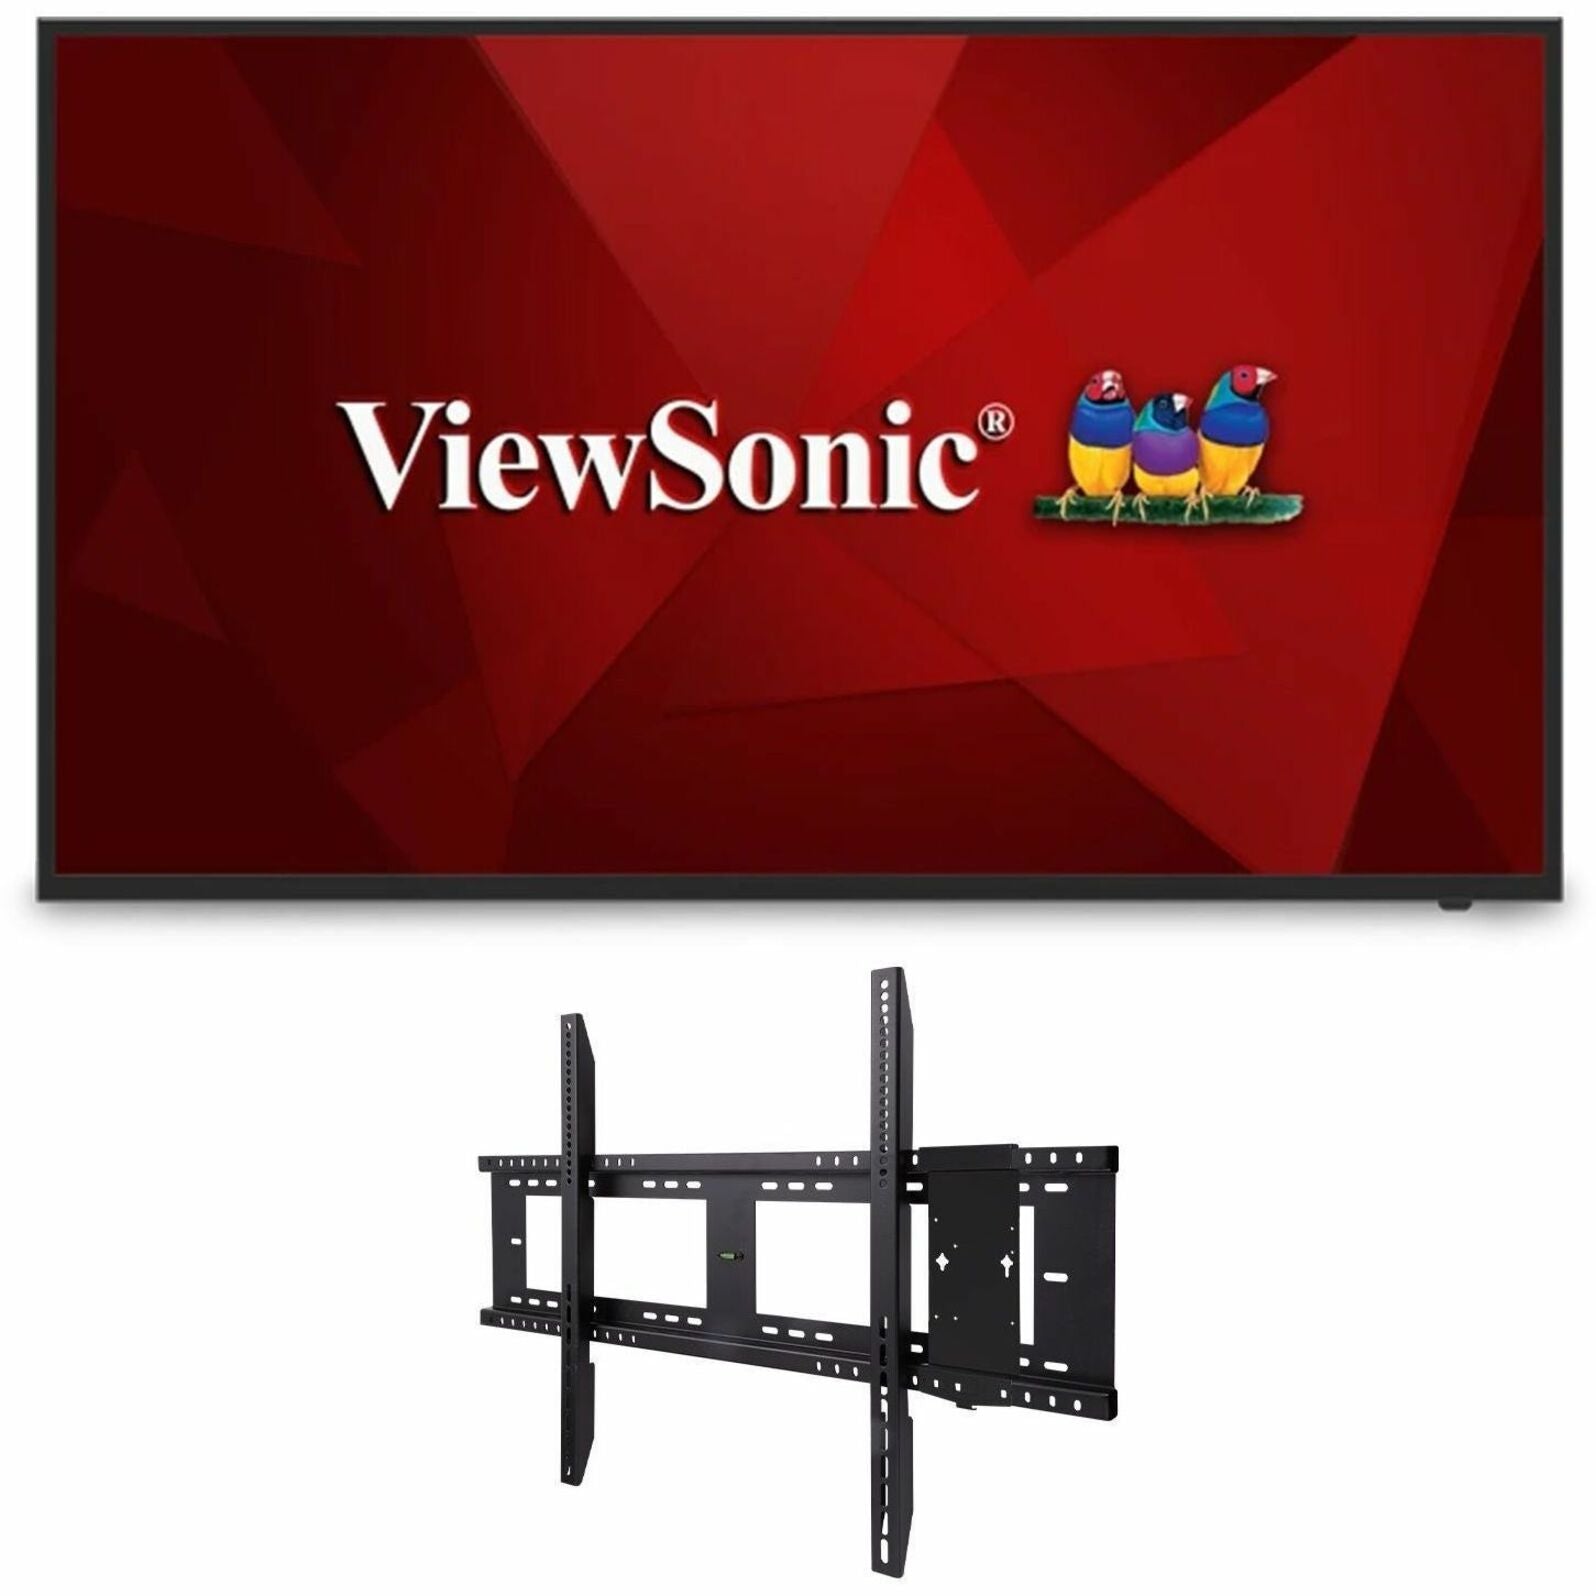 ViewSonic CDE5512-E1 Digital Signage Display - 4K, Integrated Software, Fixed Wall Mount